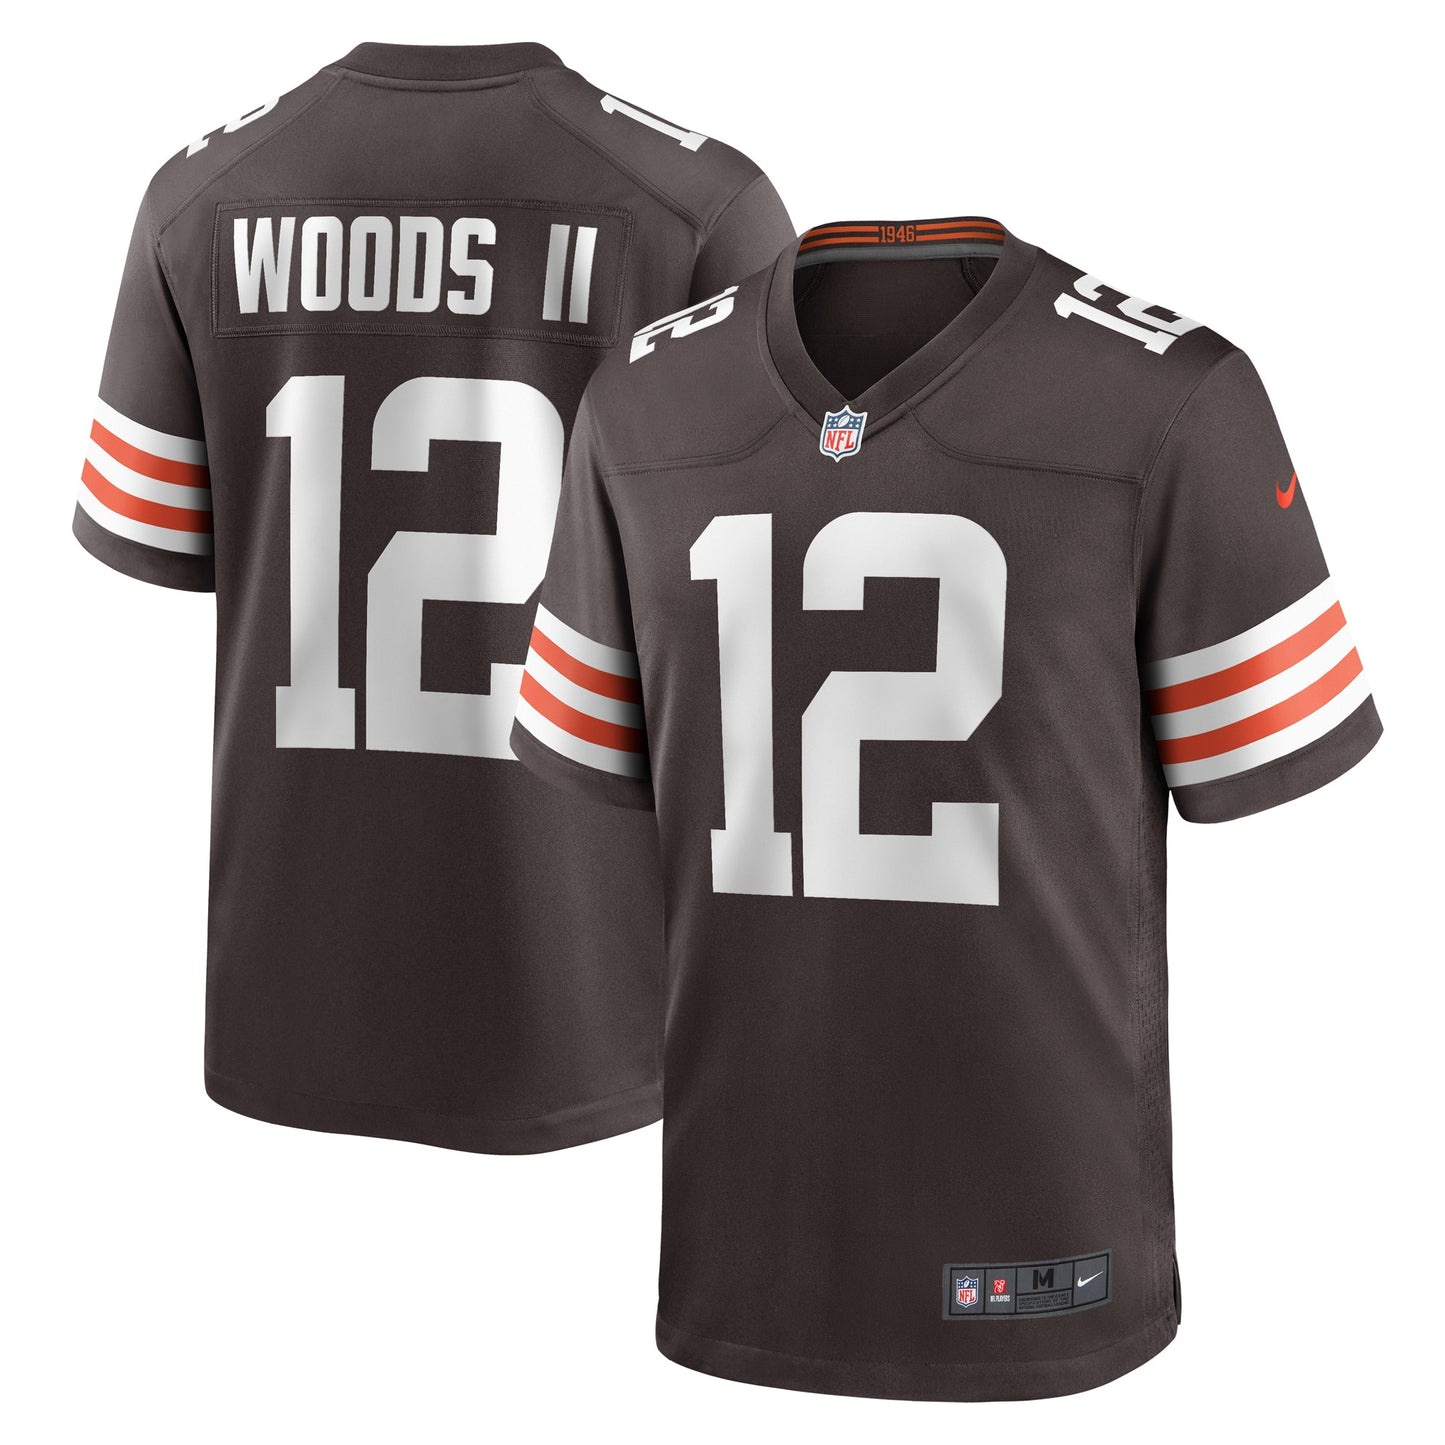 Michael Woods II Cleveland Browns Nike Game Player Jersey - Brown